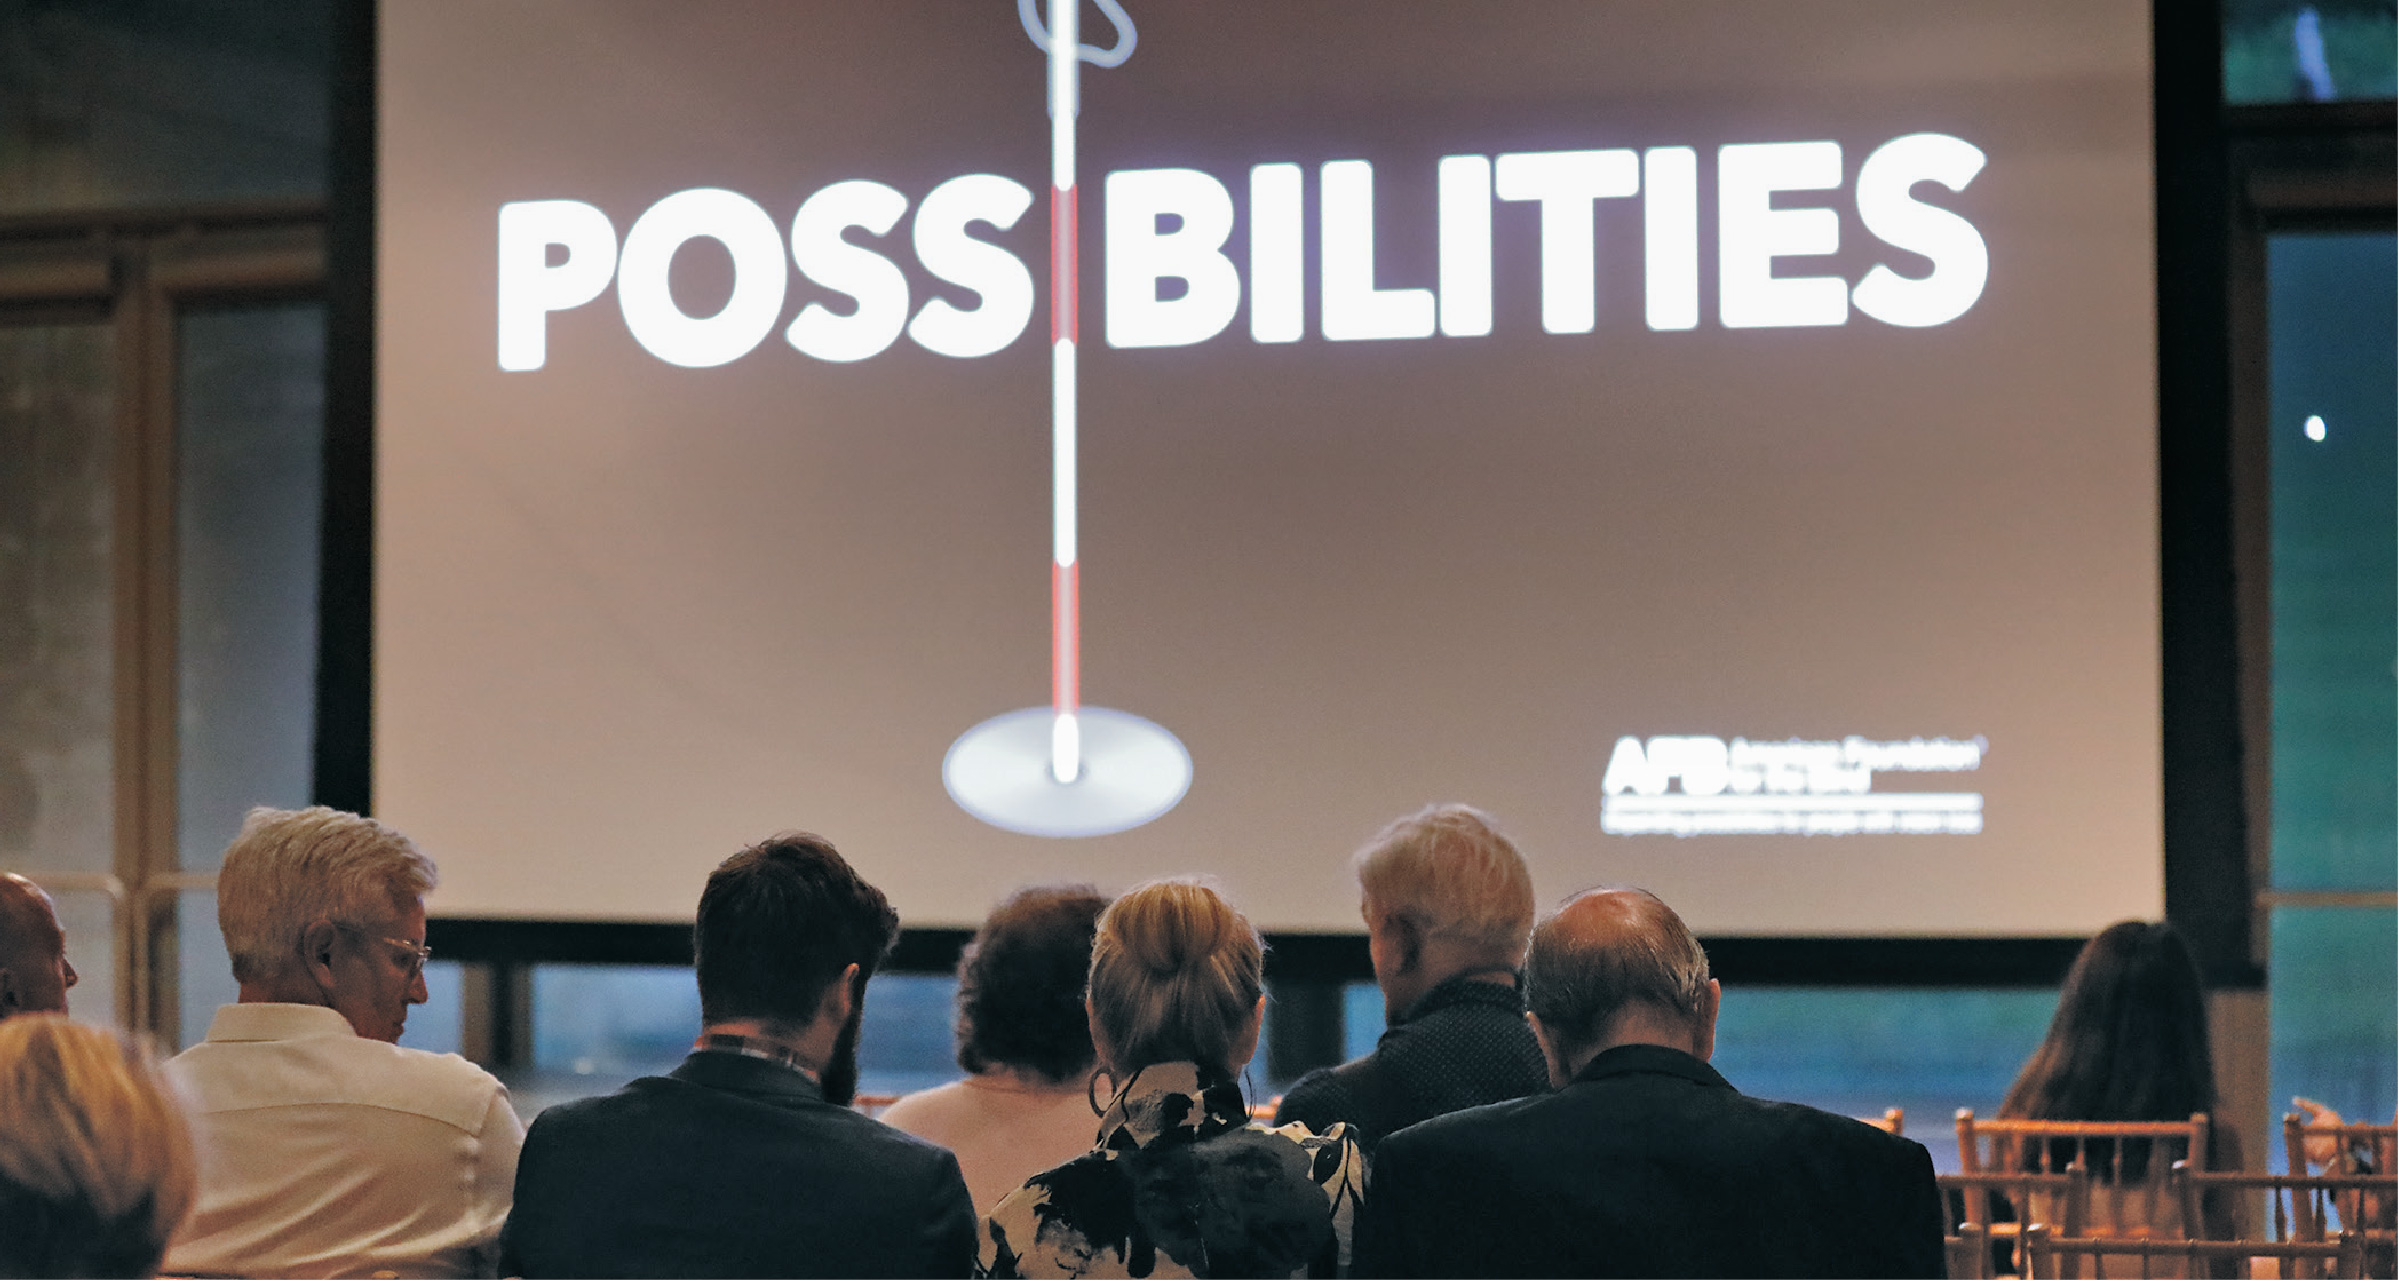 Audience members looking at a screen with the "Possibilities" documentary logo.